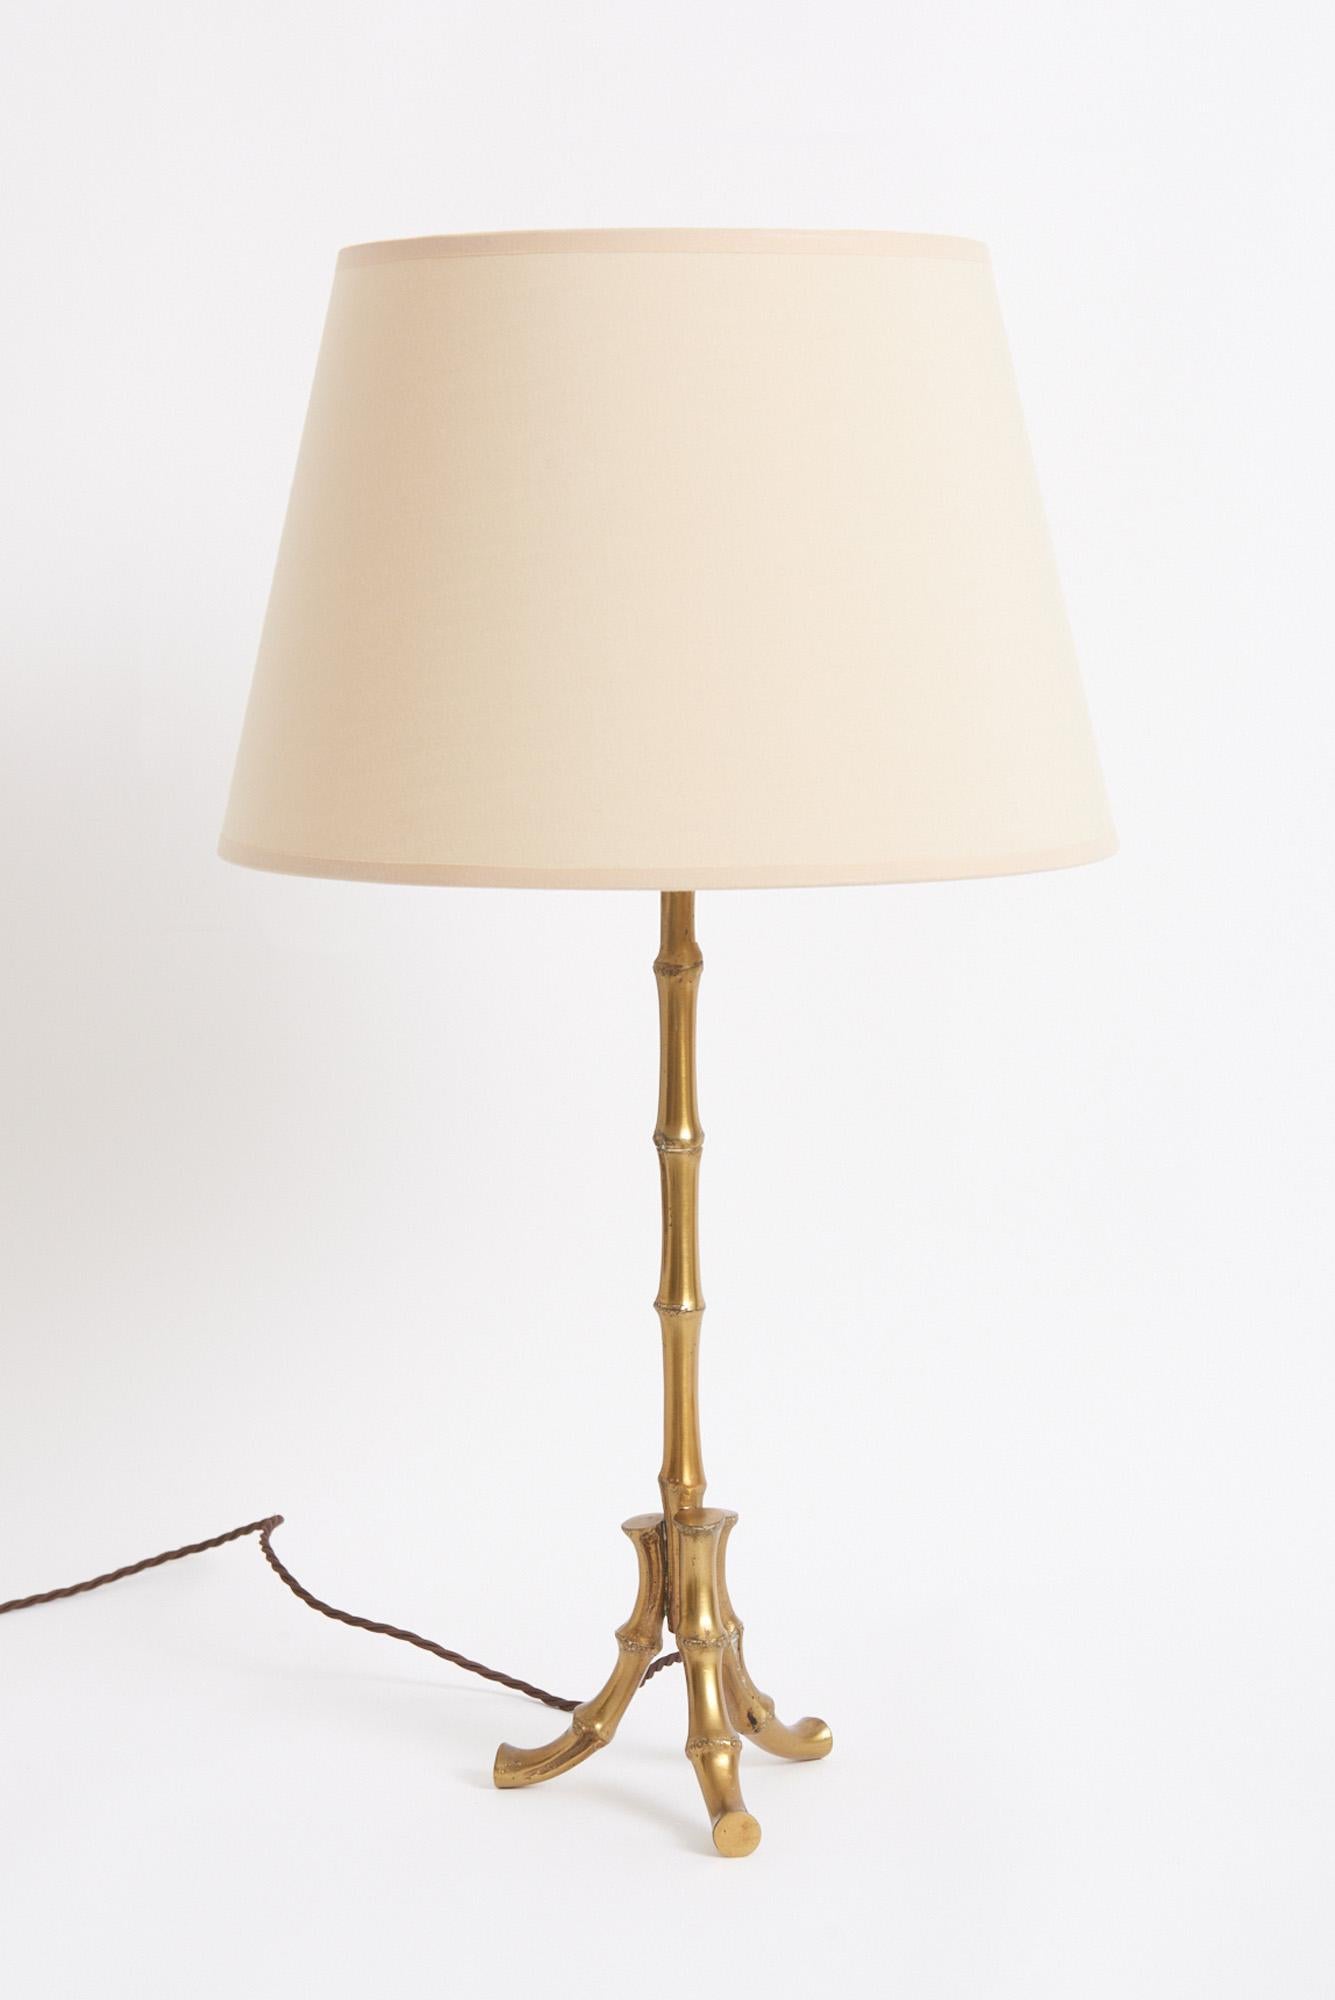 A brass stylised bamboo table lamp, possibly by Maison Baguès.
France, mid 20th century
With the shade: 61 cm high by 30.5 cm diameter
Lamp base only: 45 cm high by 15 cm diameter